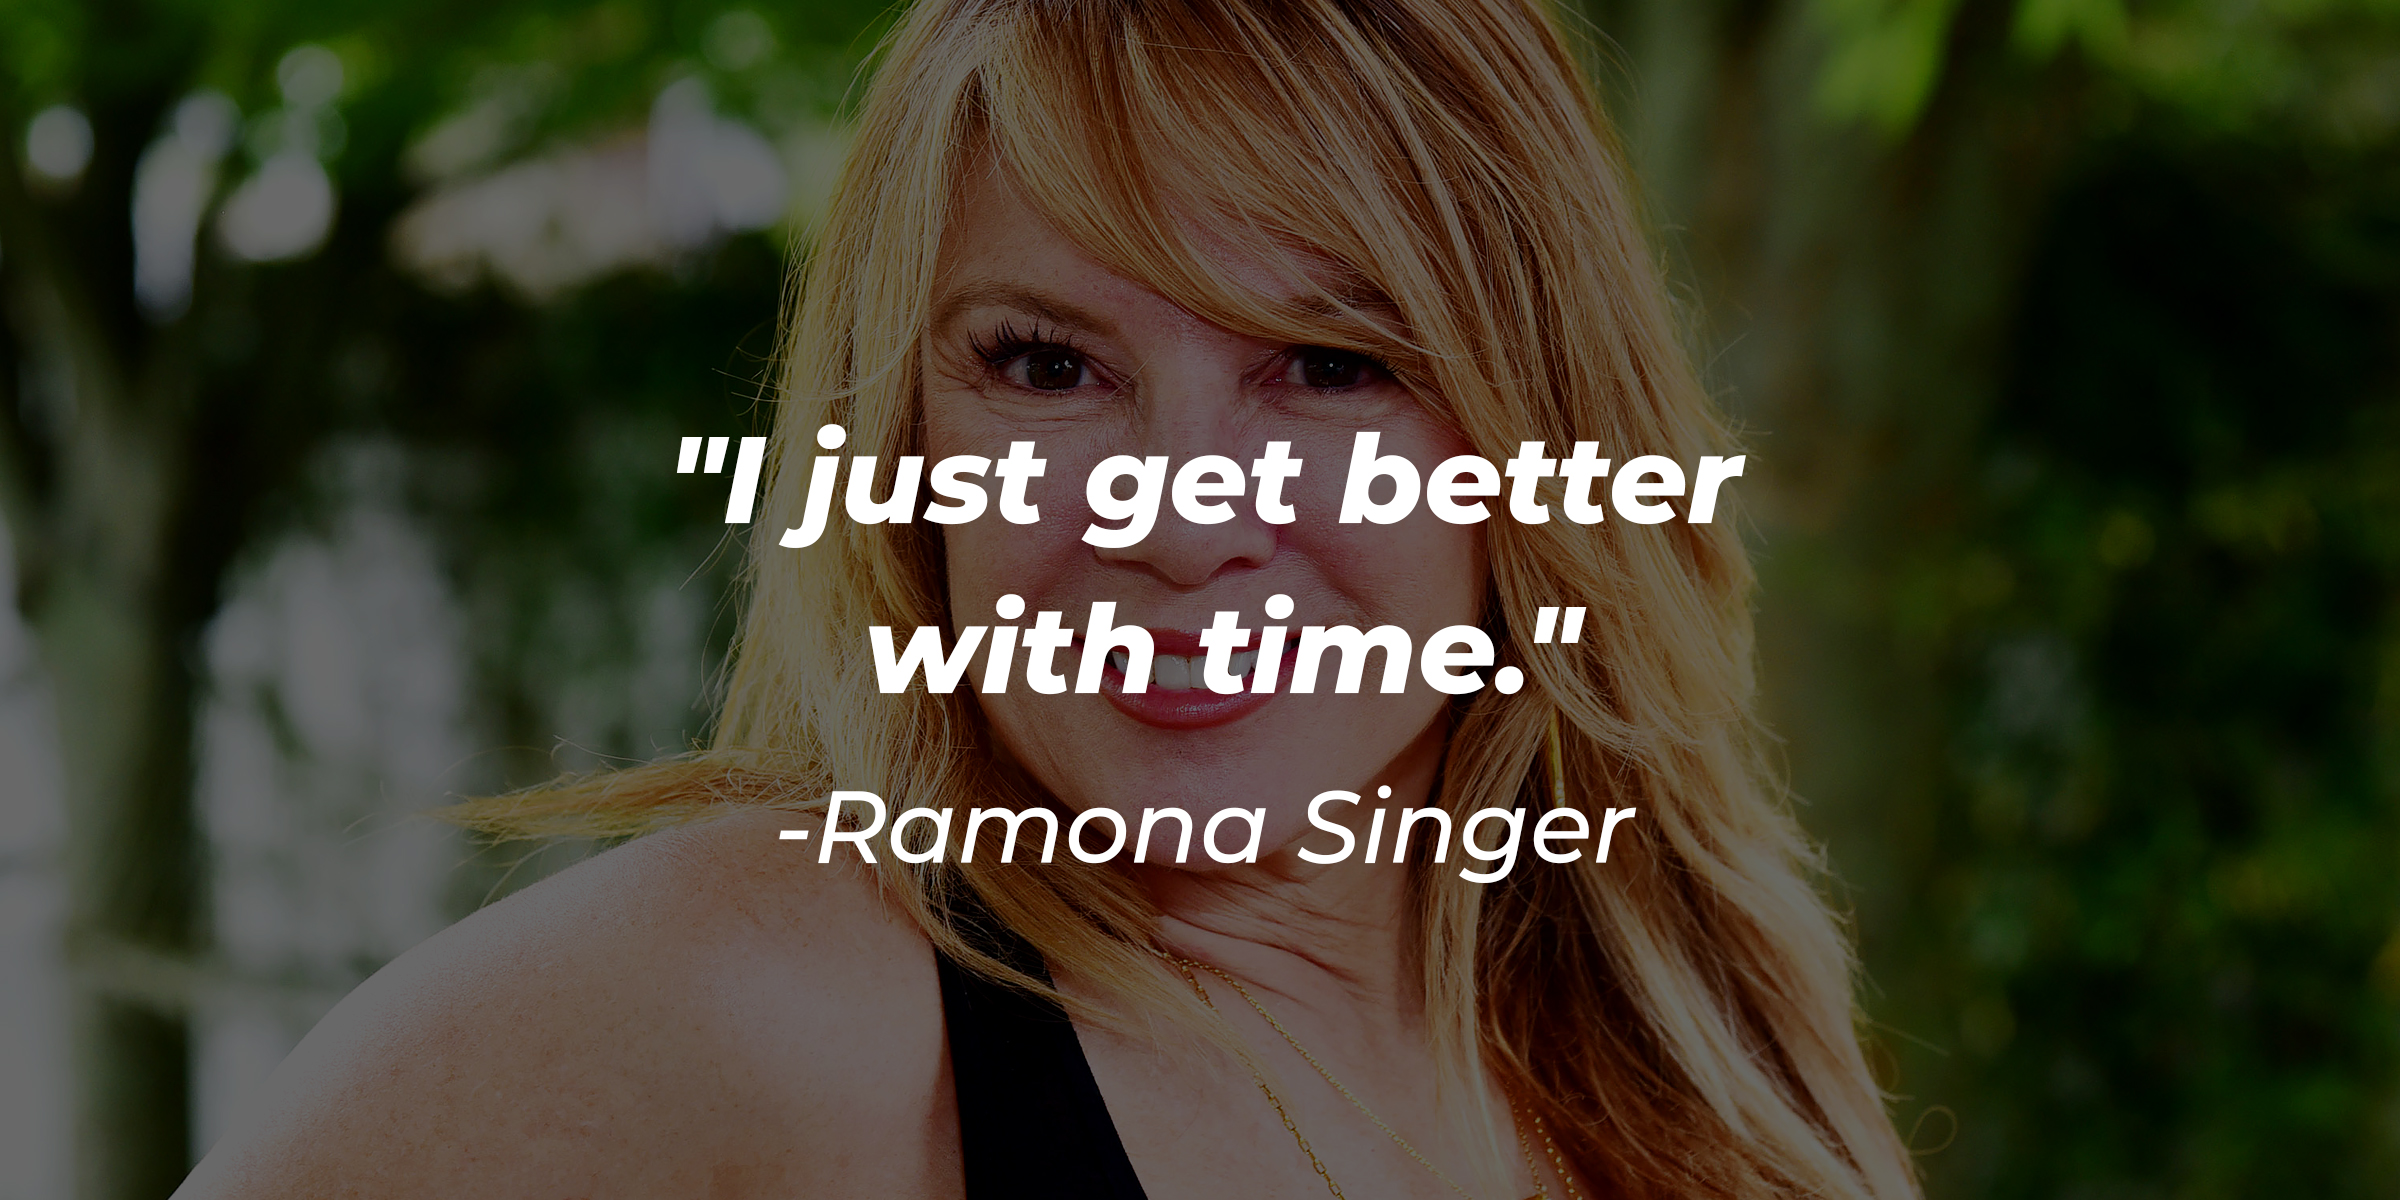 An image of Ramona Singer, with her quote: "I just get better with time." | Source: Getty Images